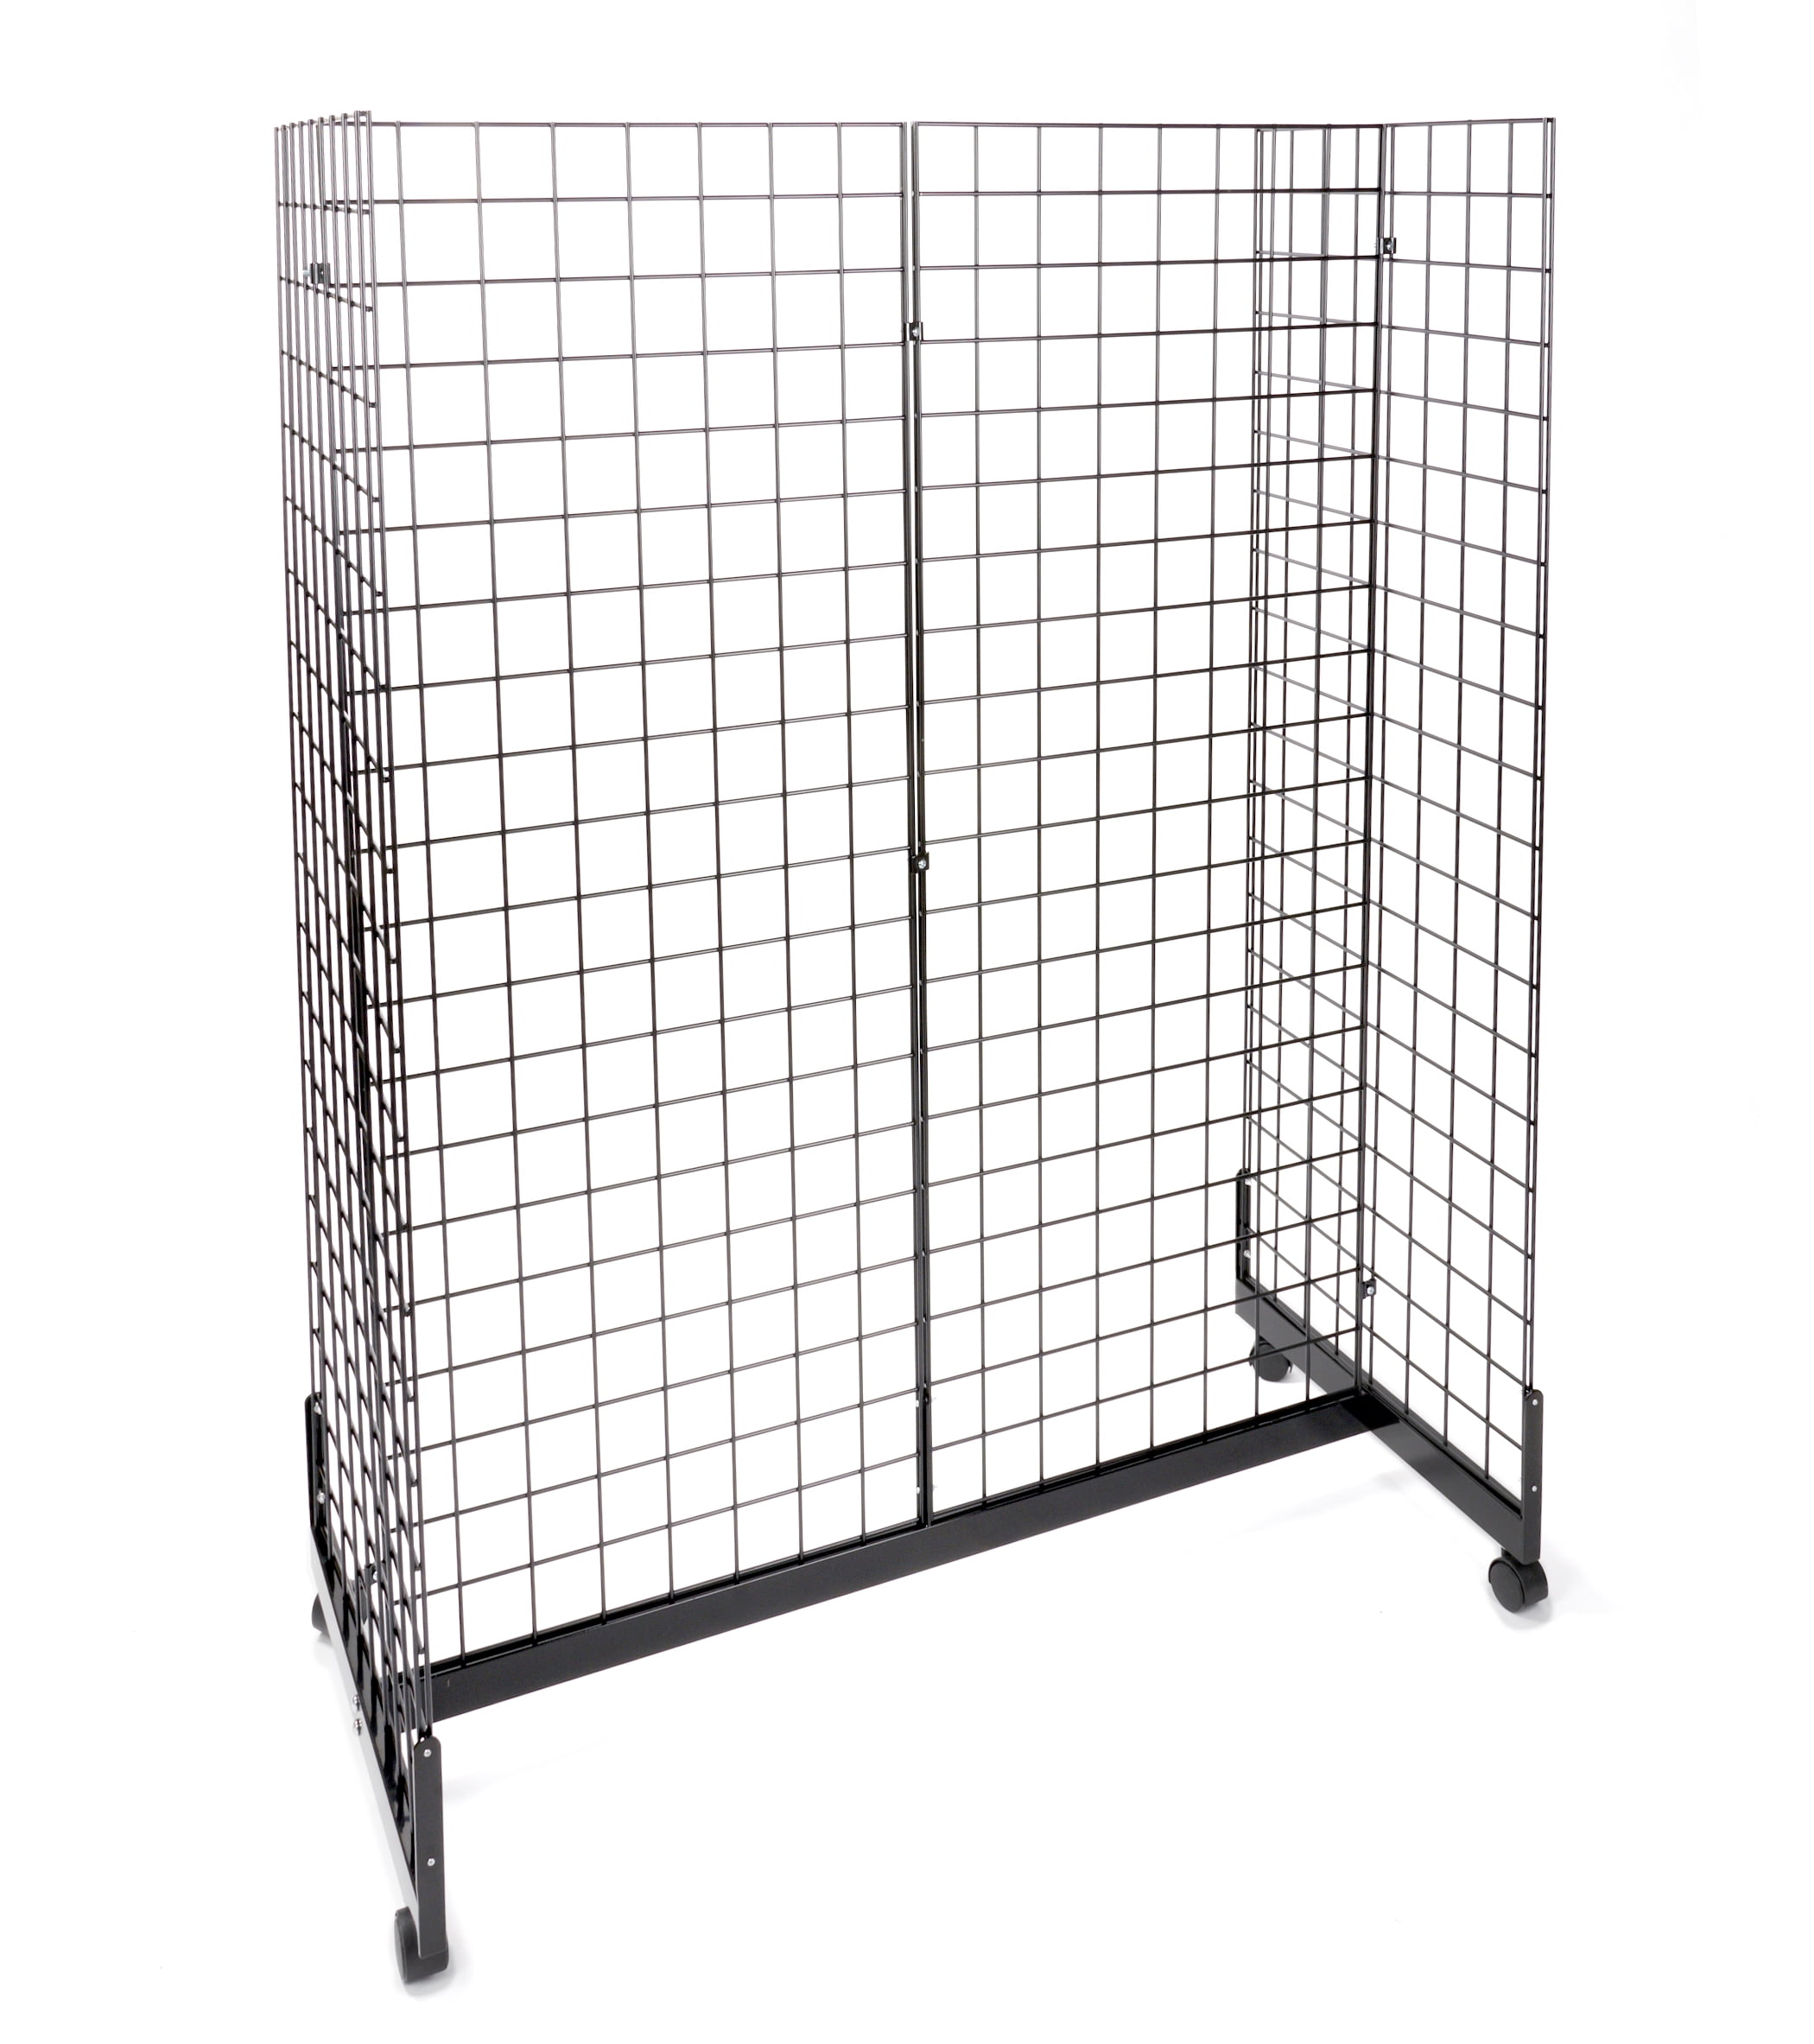 NectaCol Grid Gondola Unit, 4pcs 2'x 5' Gridwall Panels Tower with  Floorstanding, Black Wire Grid Wall Panels with Wheels Legs, Craft Fair  Display Rack, Art Display Stand - Yahoo Shopping